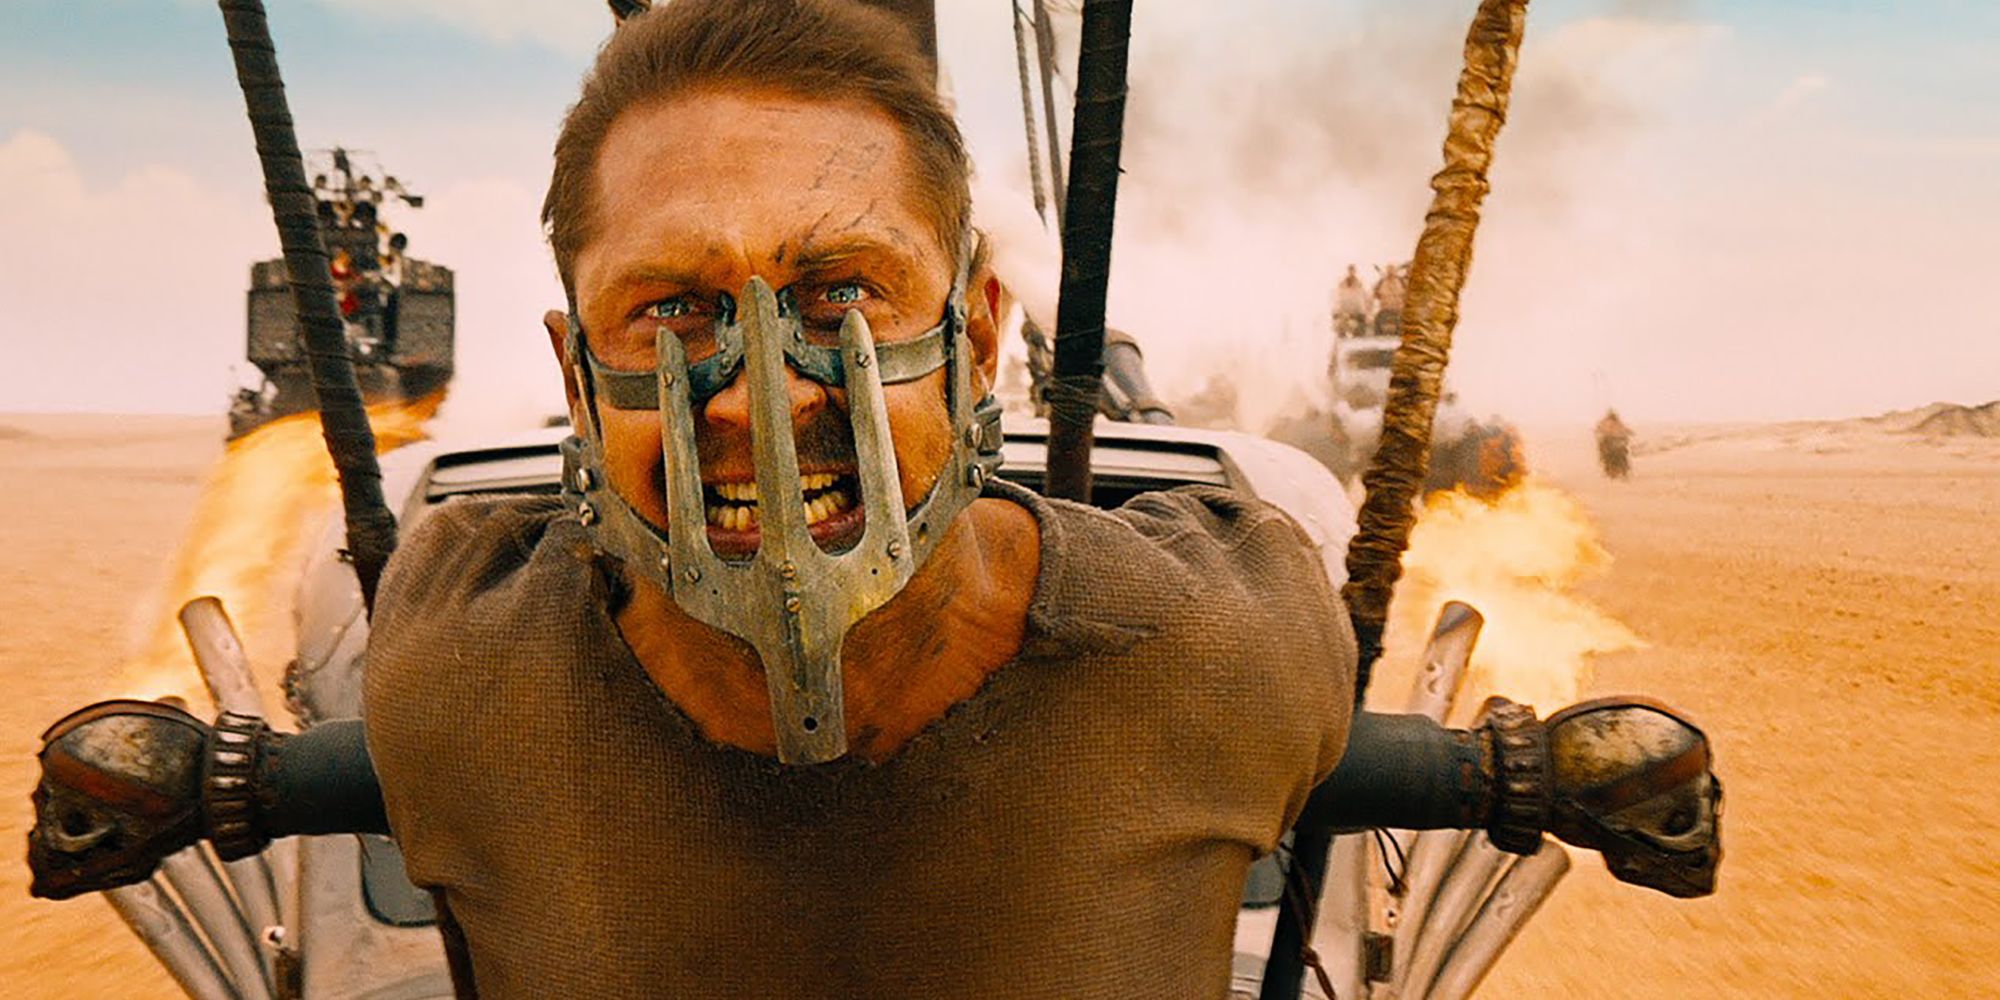 An Image From Mad Max: Fury Road